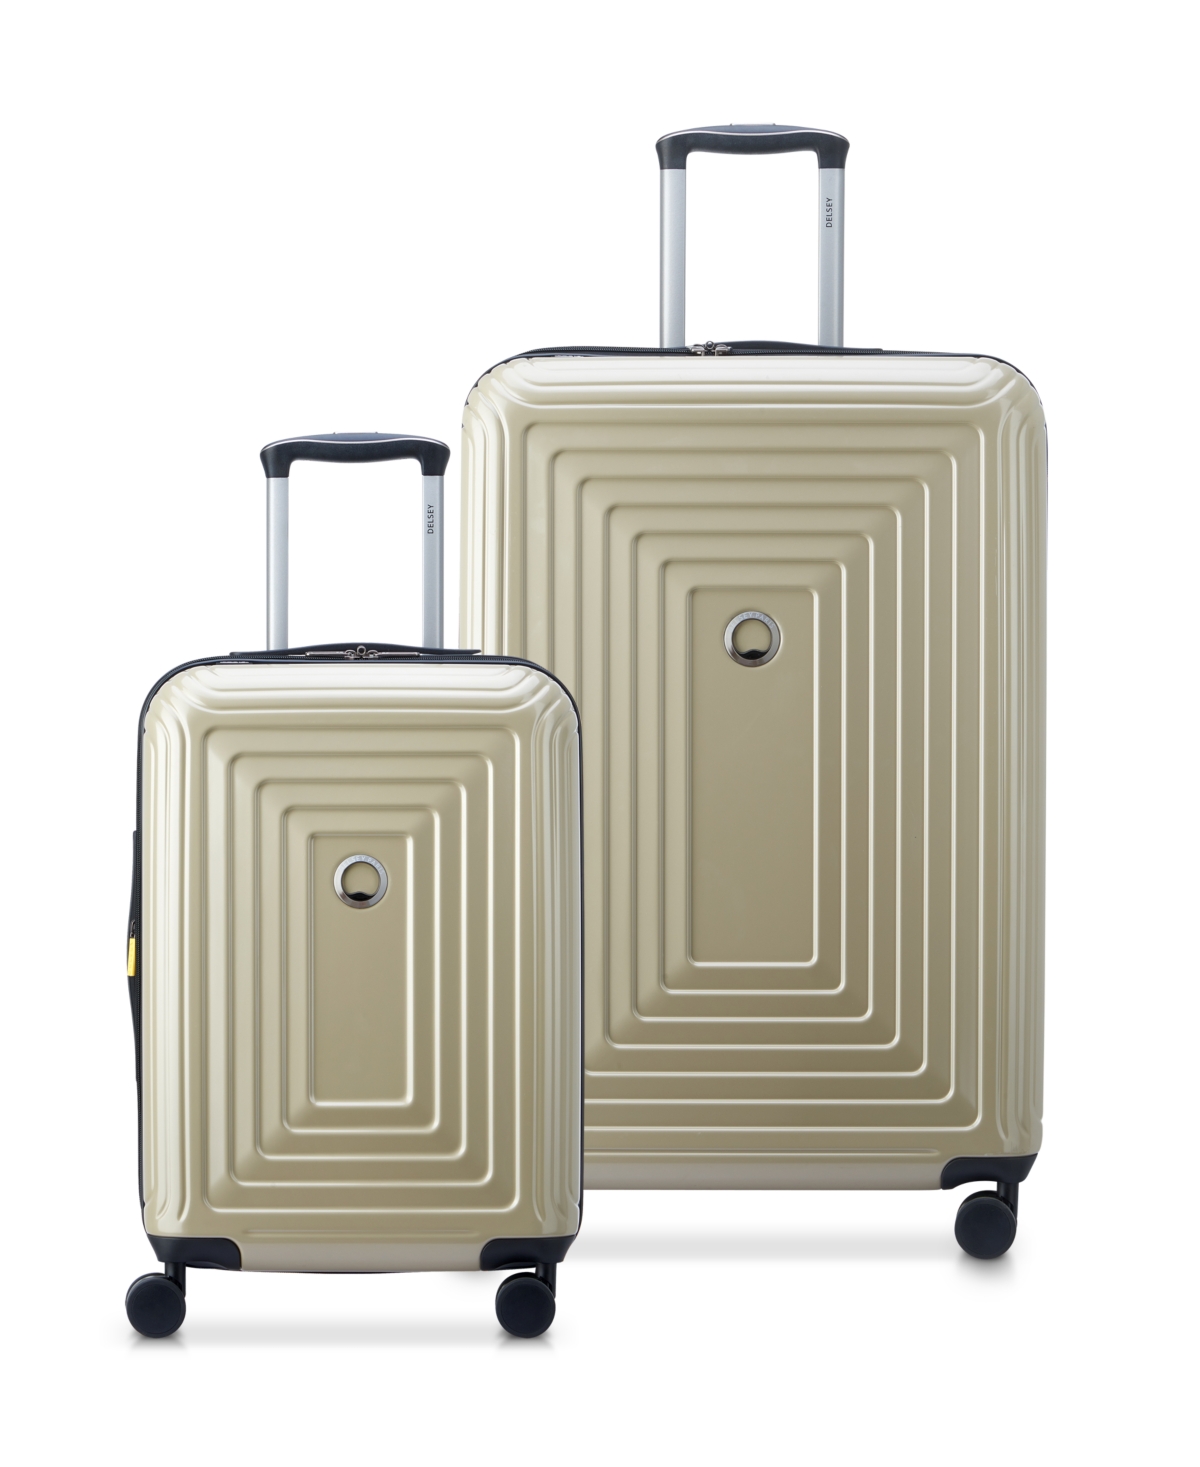 Delsey Corsica 2 Piece Hardside Luggage Set, Carry-on And 27" Spinner In Glossy Bronze